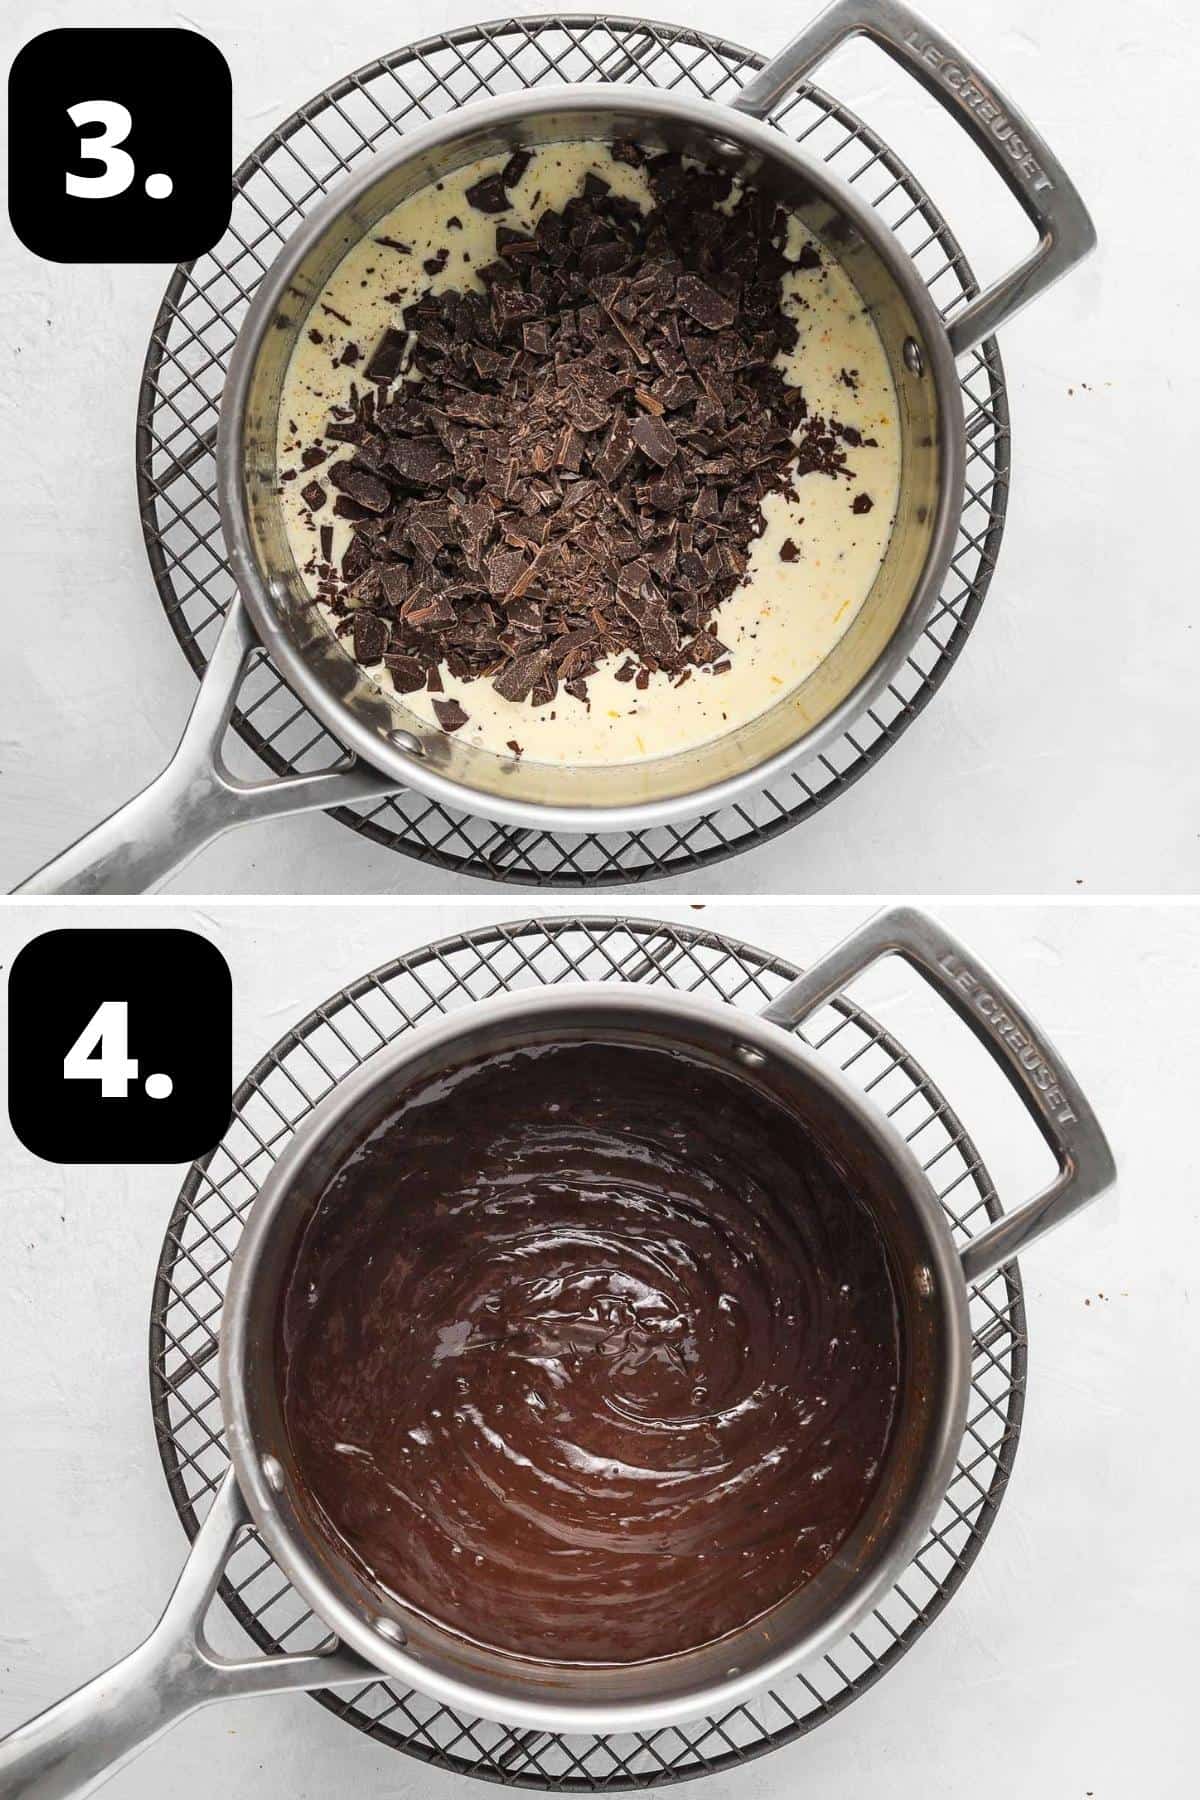 Steps 3-4 of preparing this recipe - the chopped chocolate added to the cream and the mixture combined.